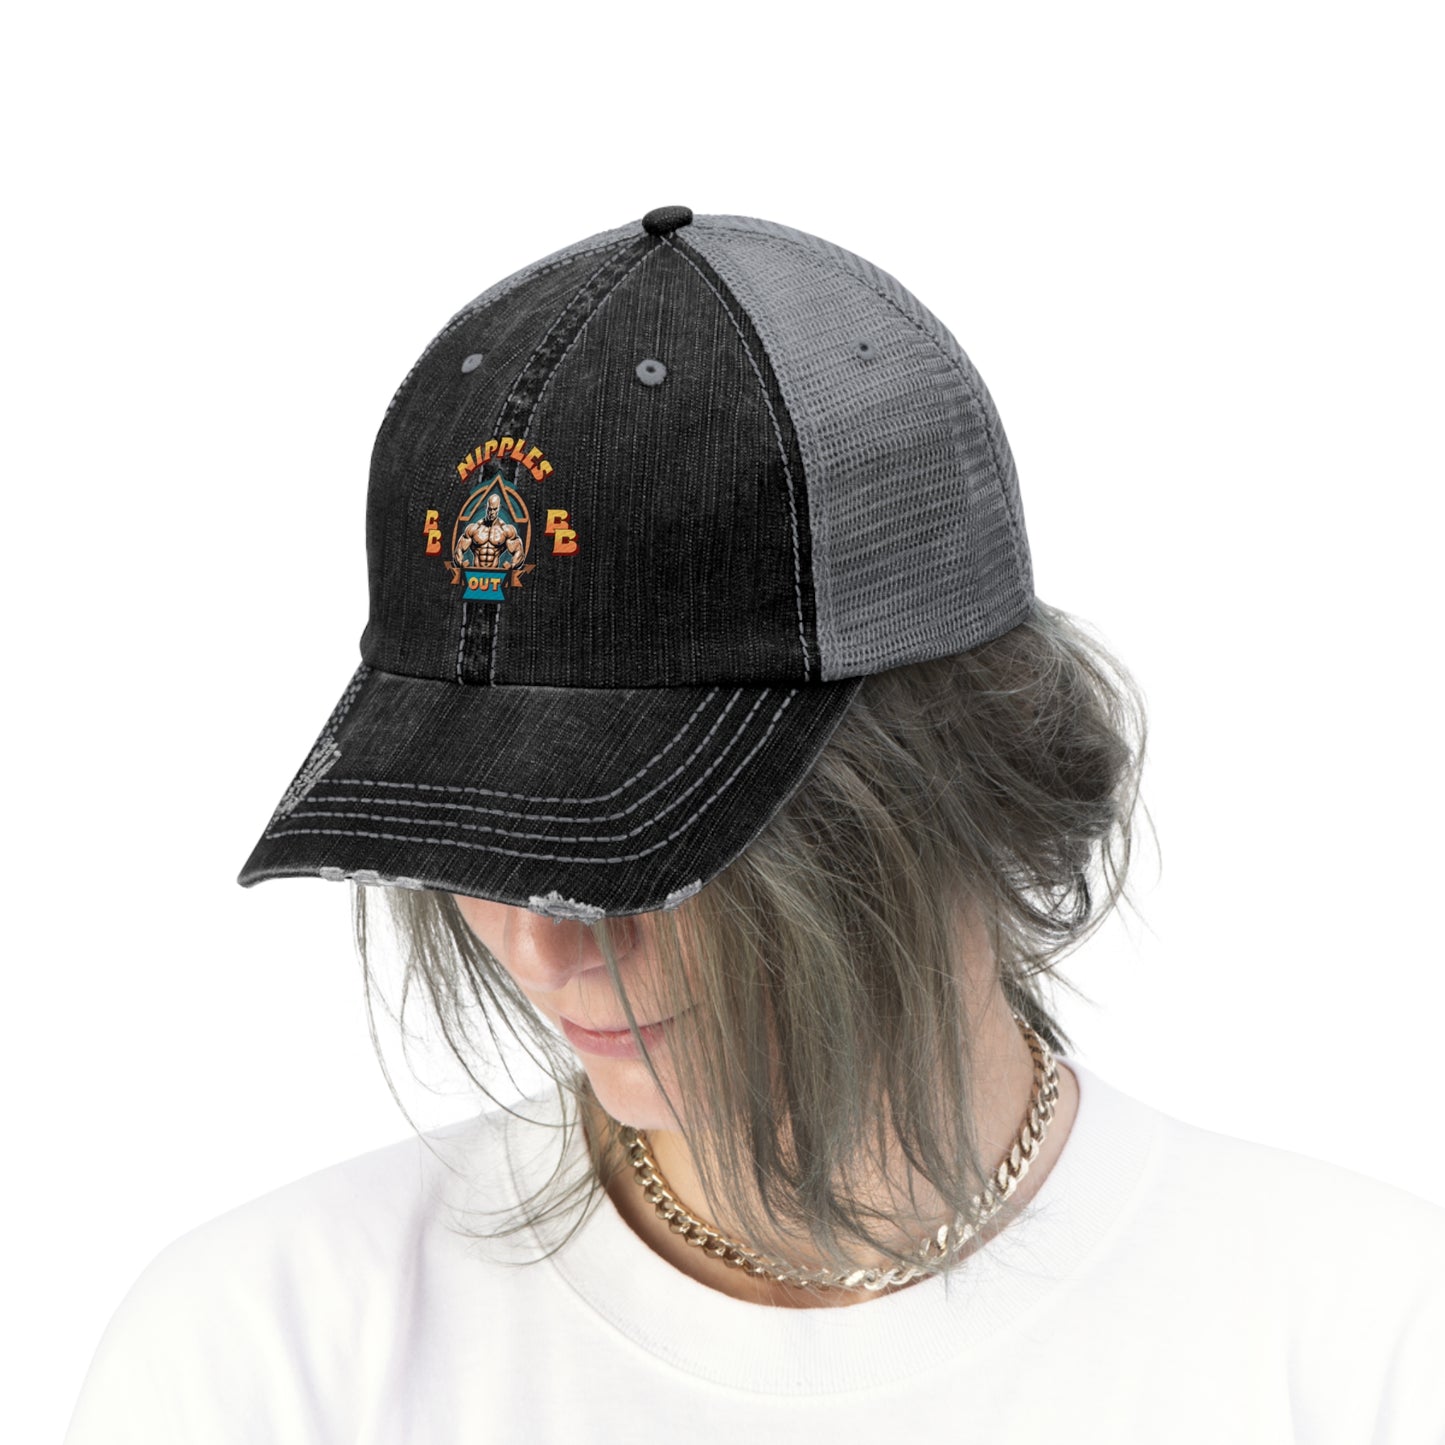 Nipples out Unisex Trucker Hat